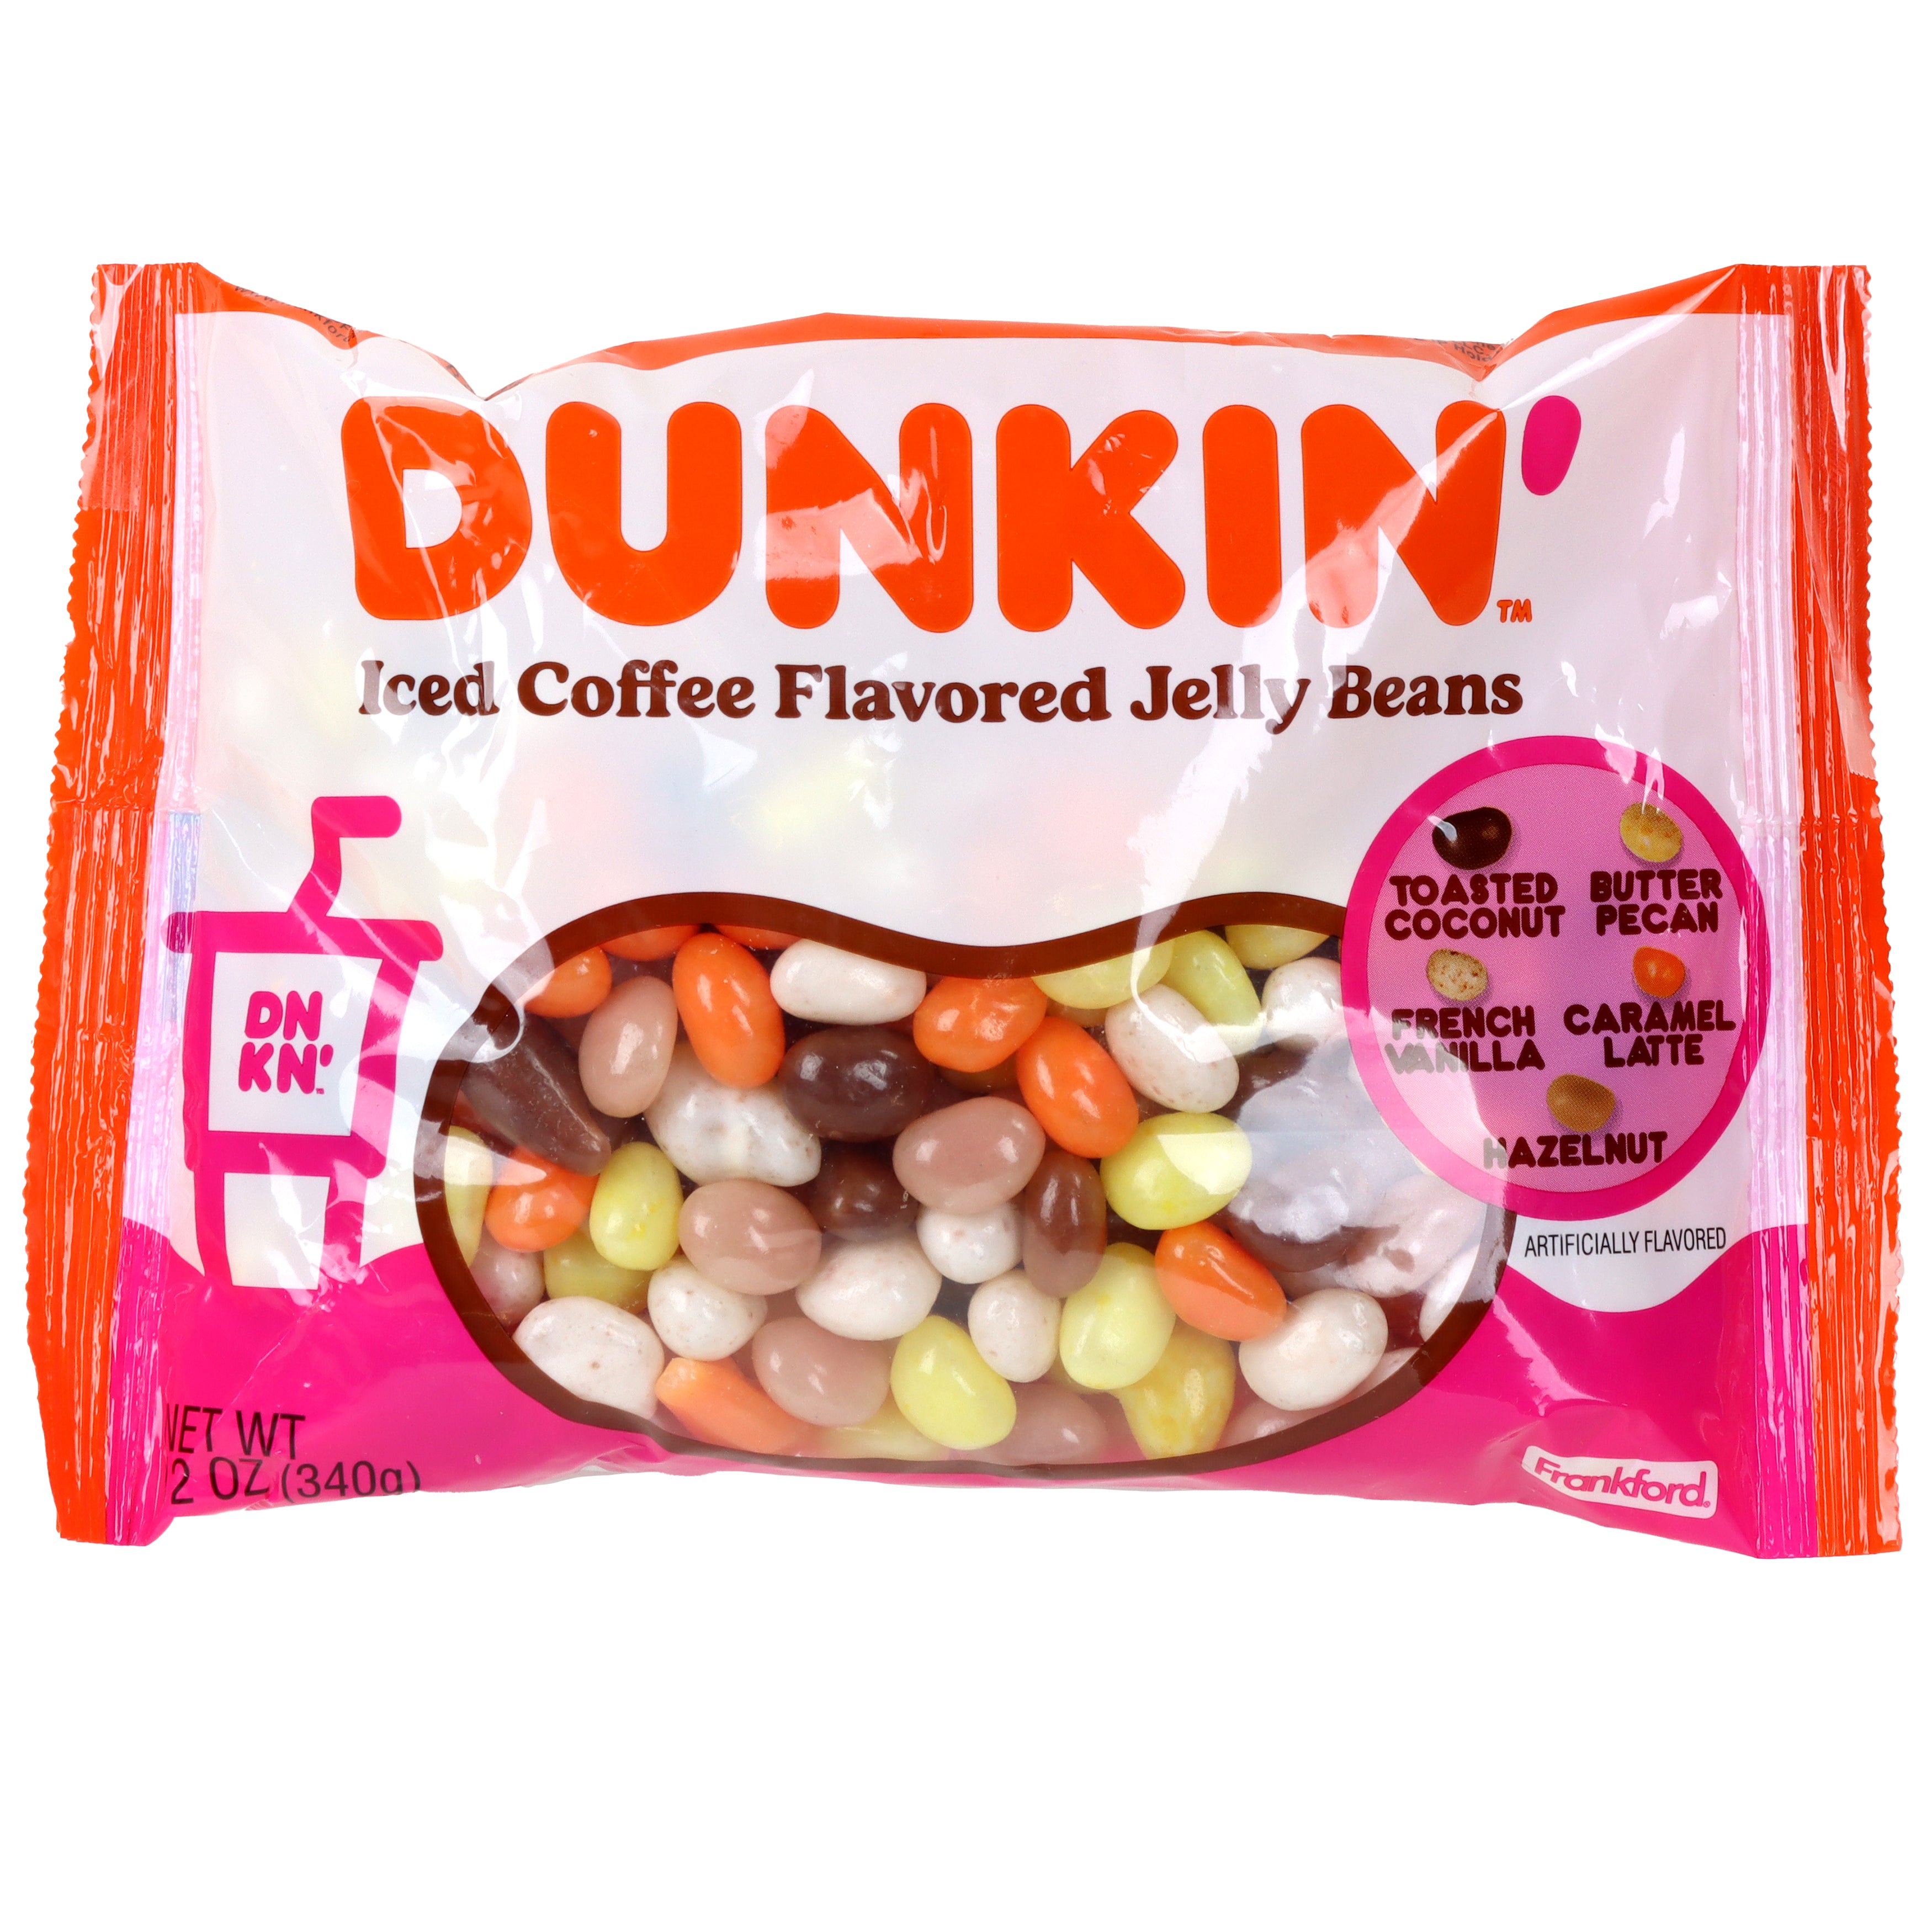 Frankford　Coffee　Candy　Beans　Flavored　Jelly　Iced　Dunkin'　–